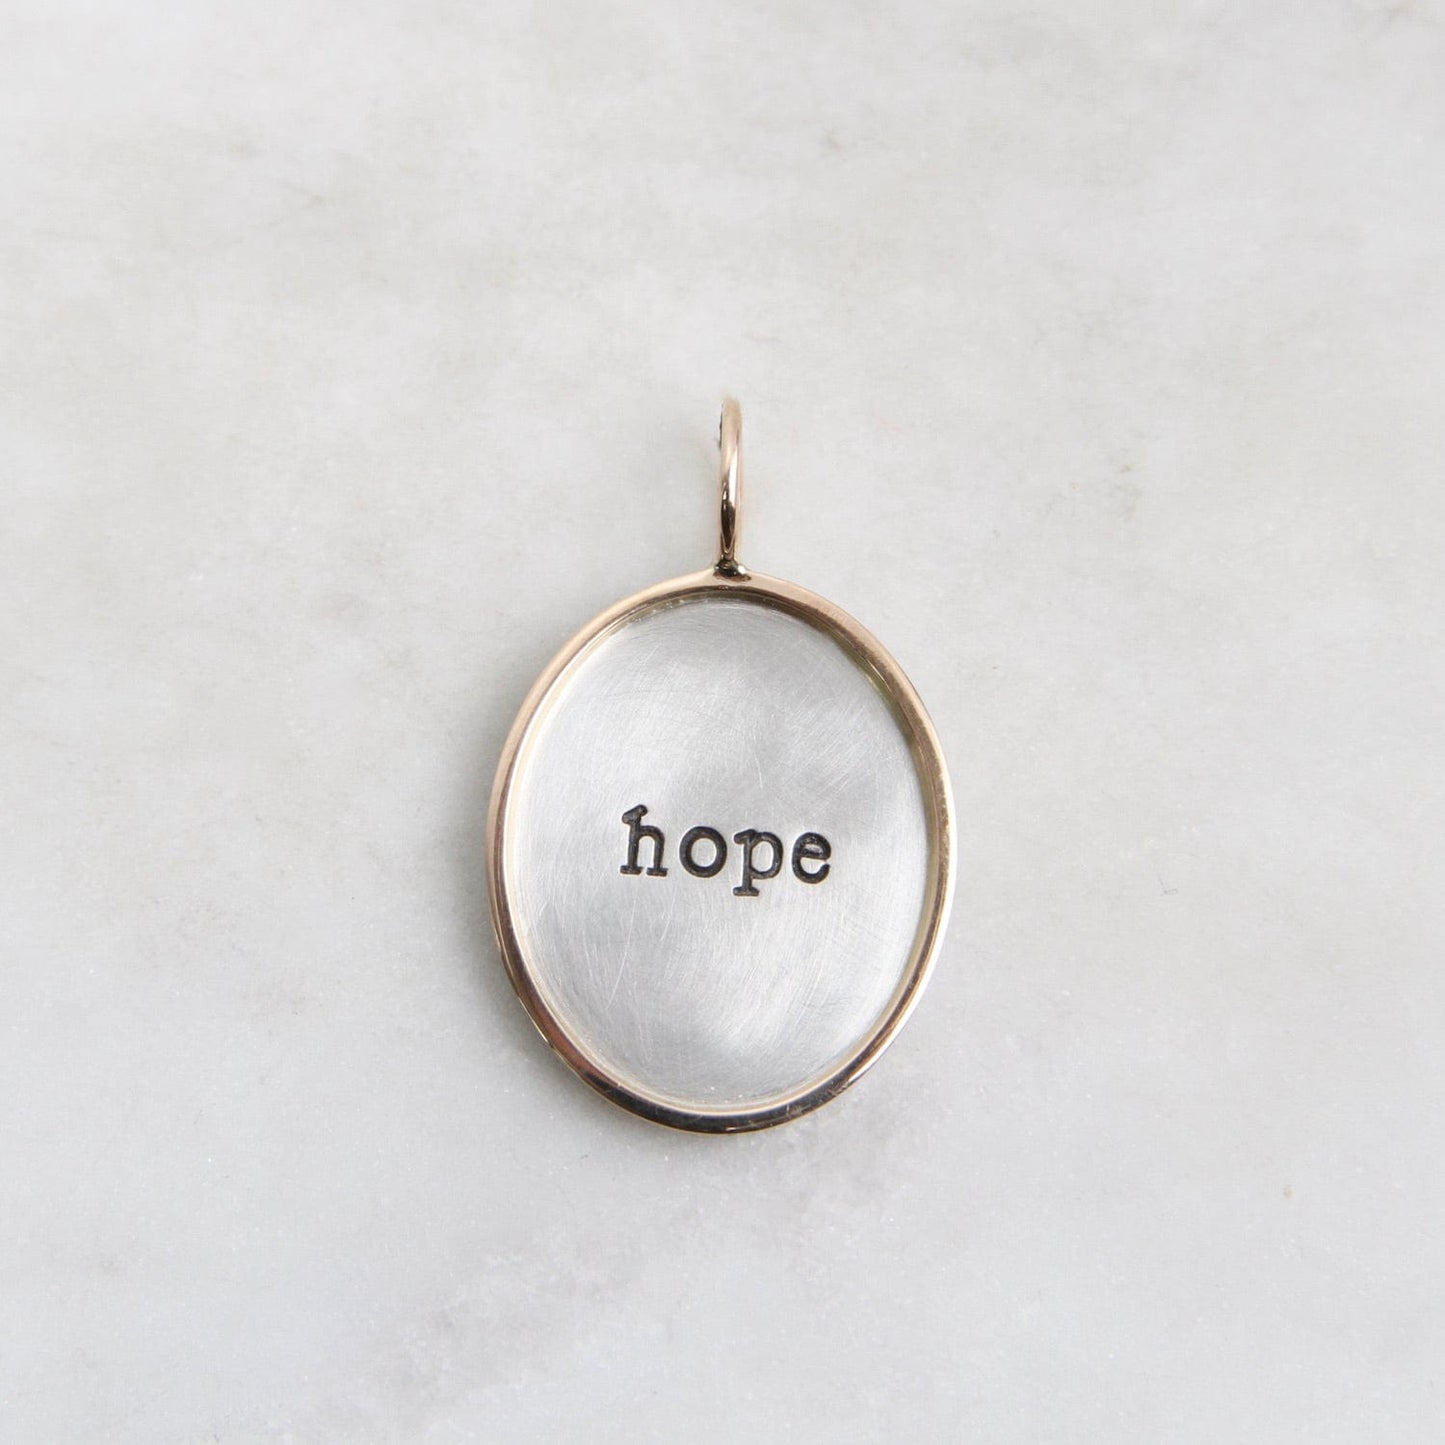 CHM "hope" Sterling Silver and 14K Gold Charm